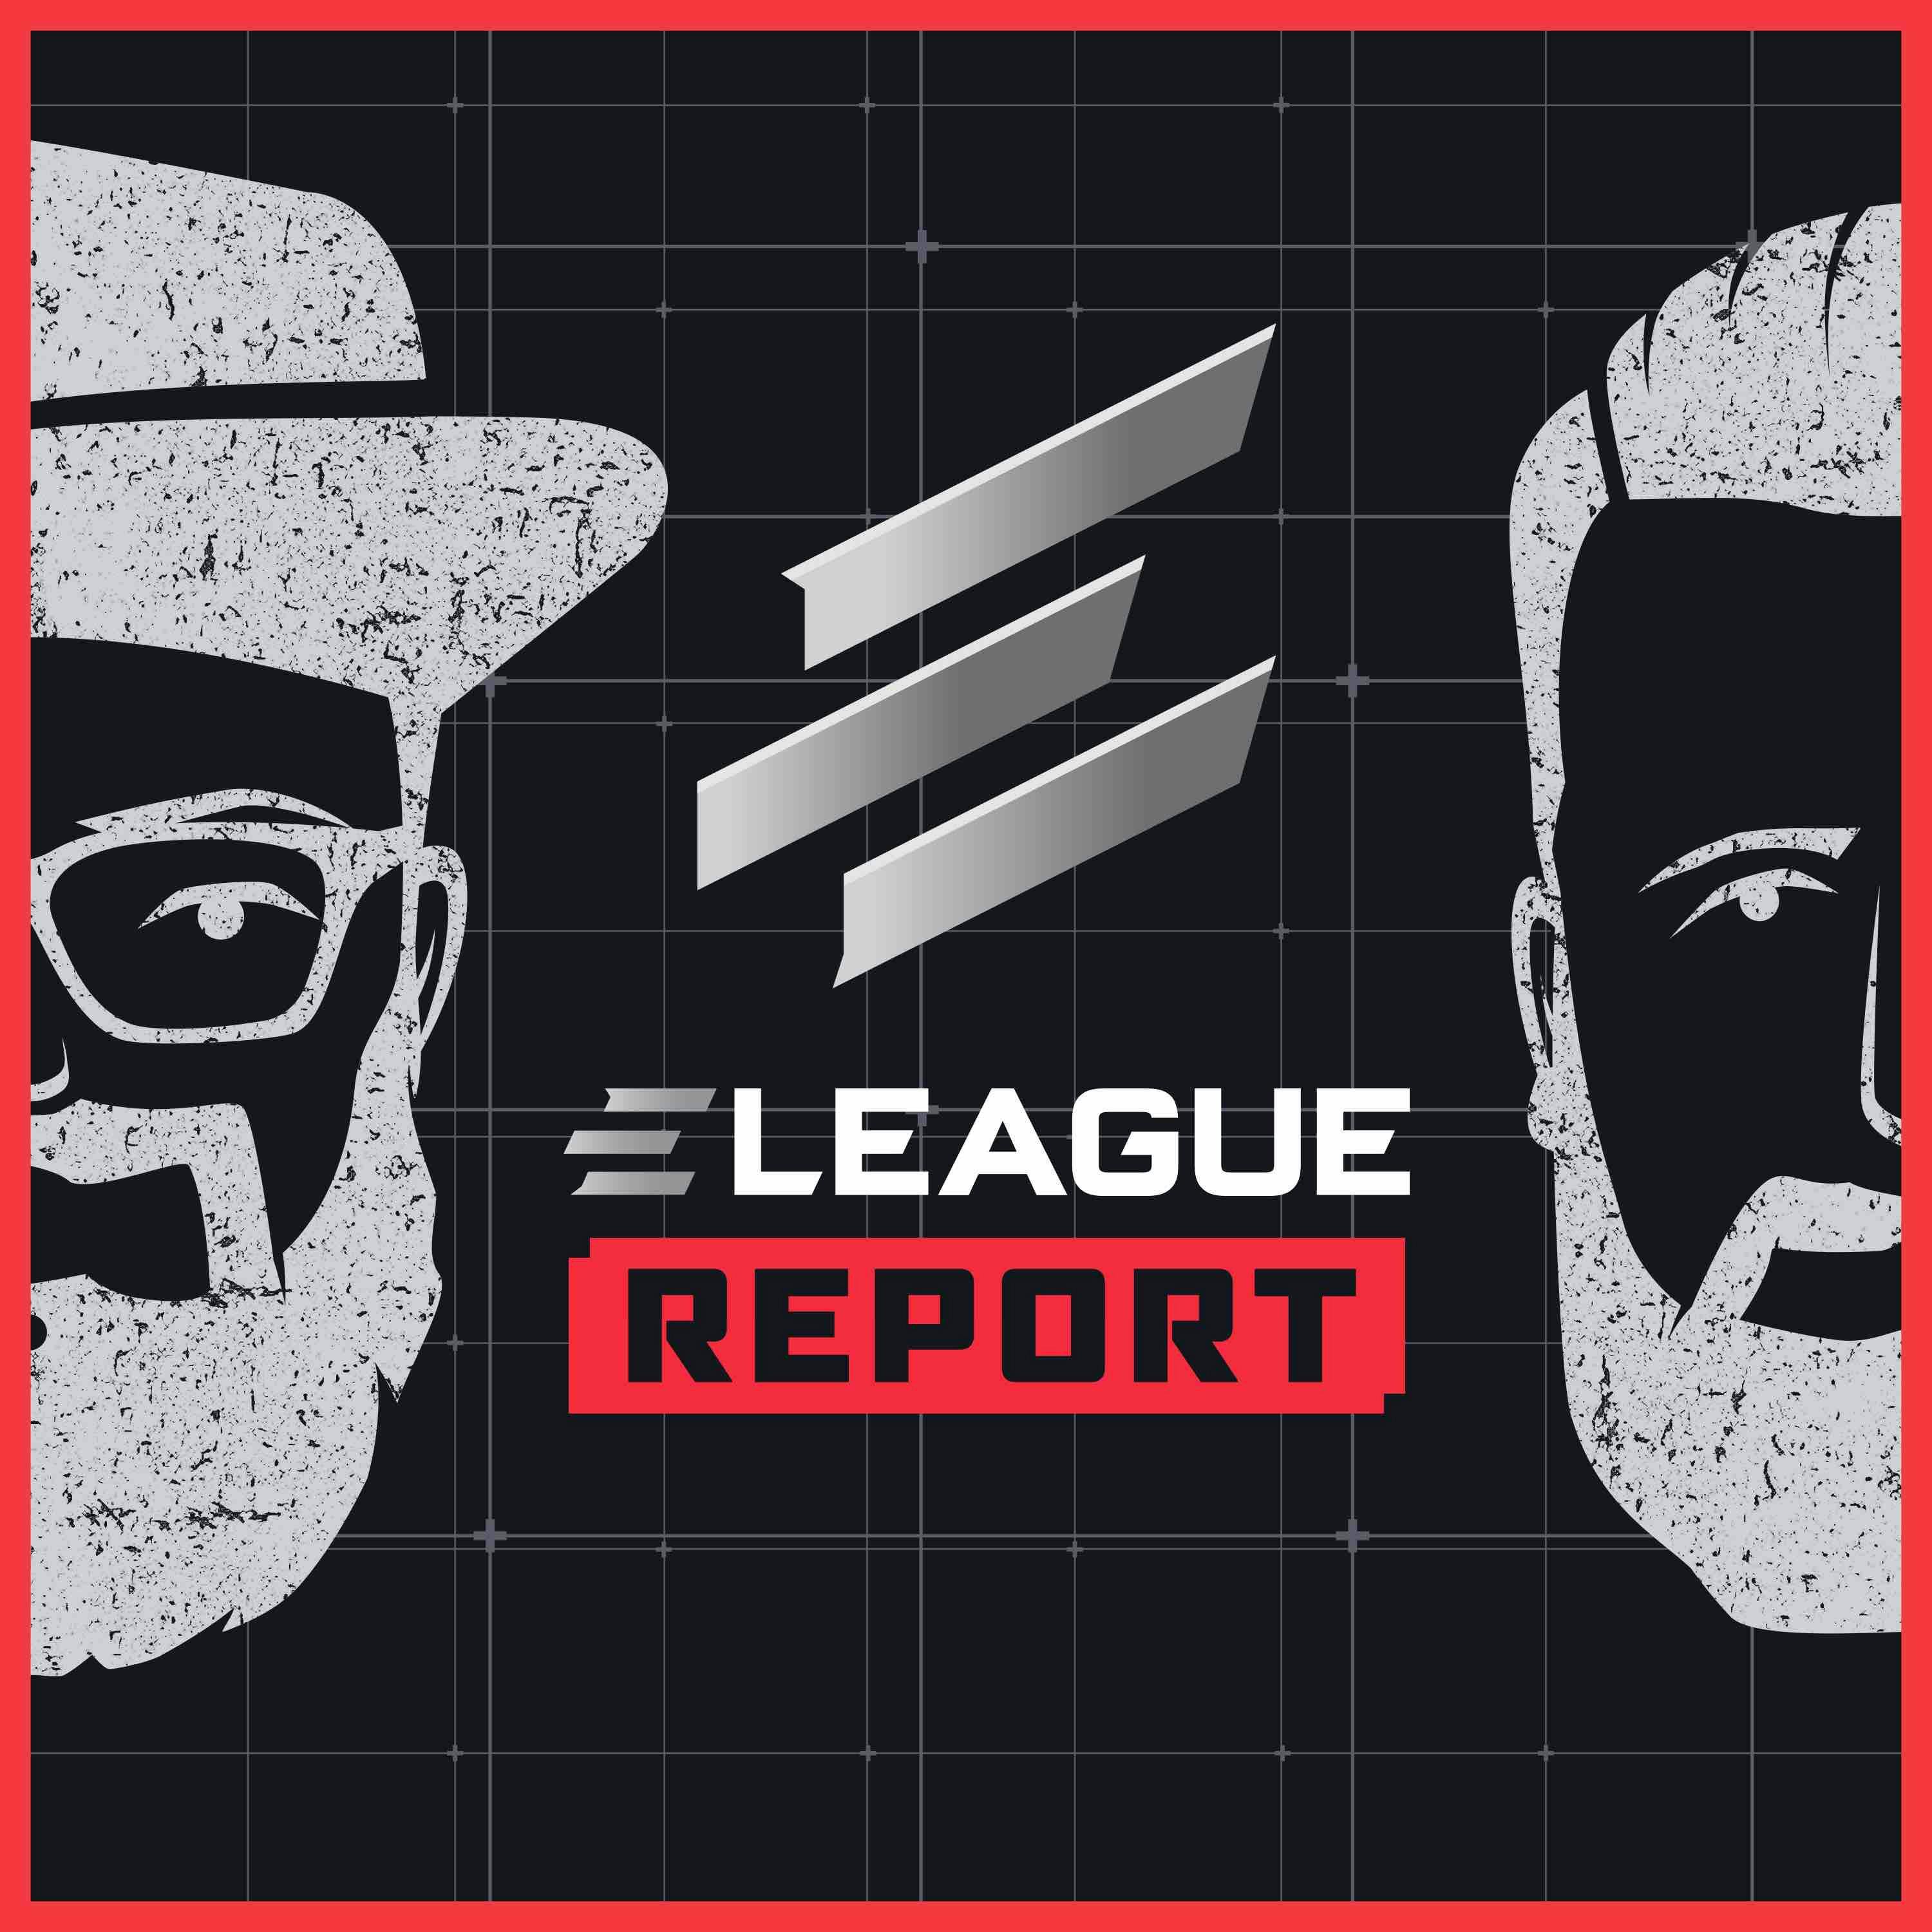 The ELEAGUE Major, improving competitive CS:GO, Overwatch League, Facebook and Twitch exclusive streaming deals